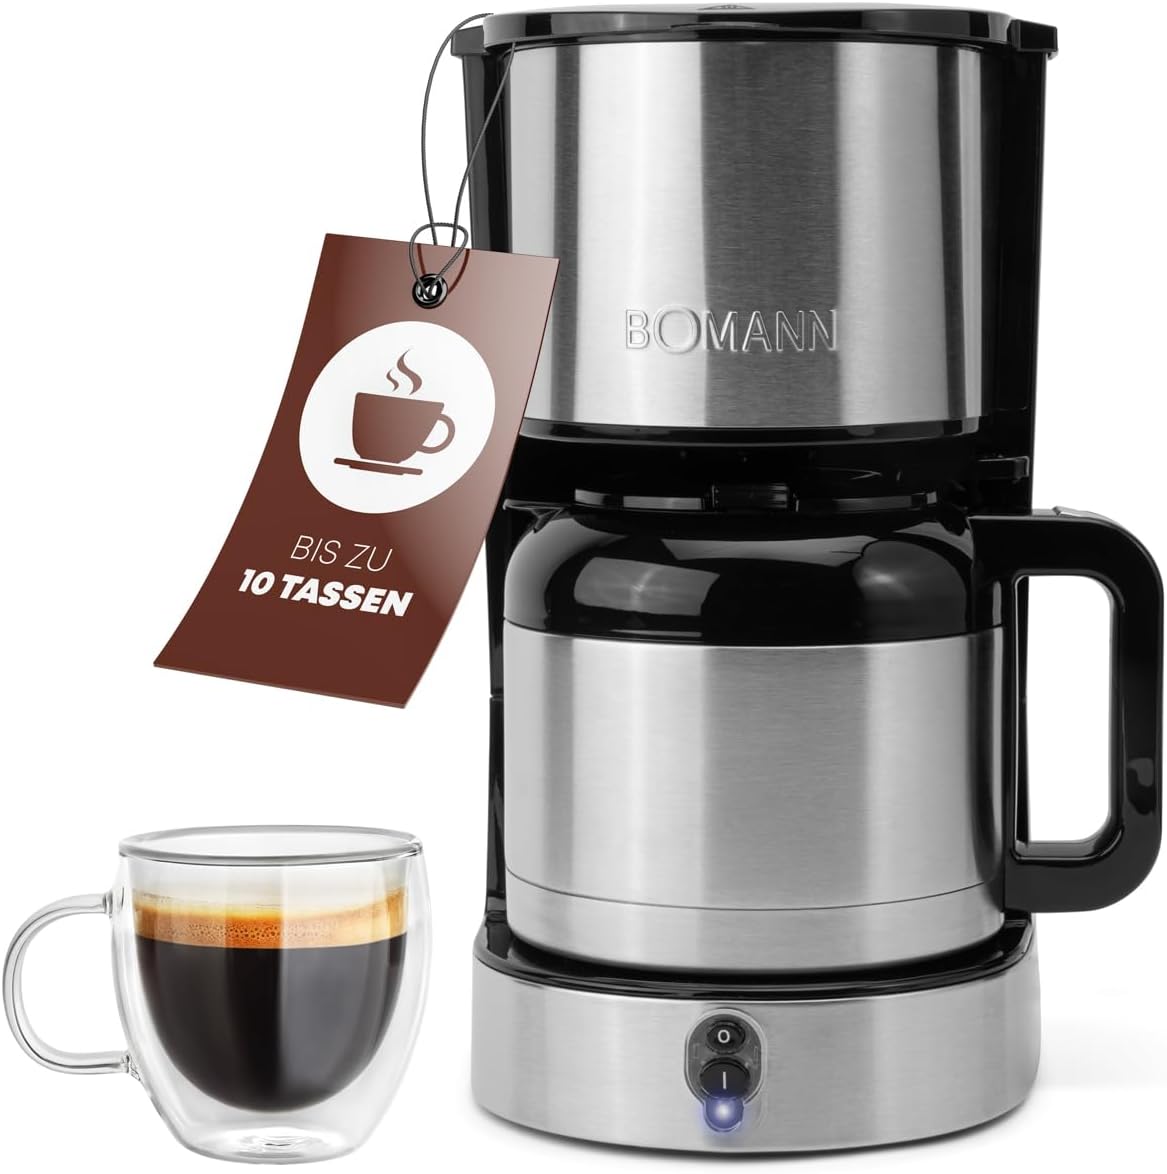 Bomann® Coffee machine with thermos flask for 8-10 cups of coffee (approx. 1.2 litres), filter coffee machine, stainless steel, double-walled thermos flask, no temperature loss, coffee machine 800 W,